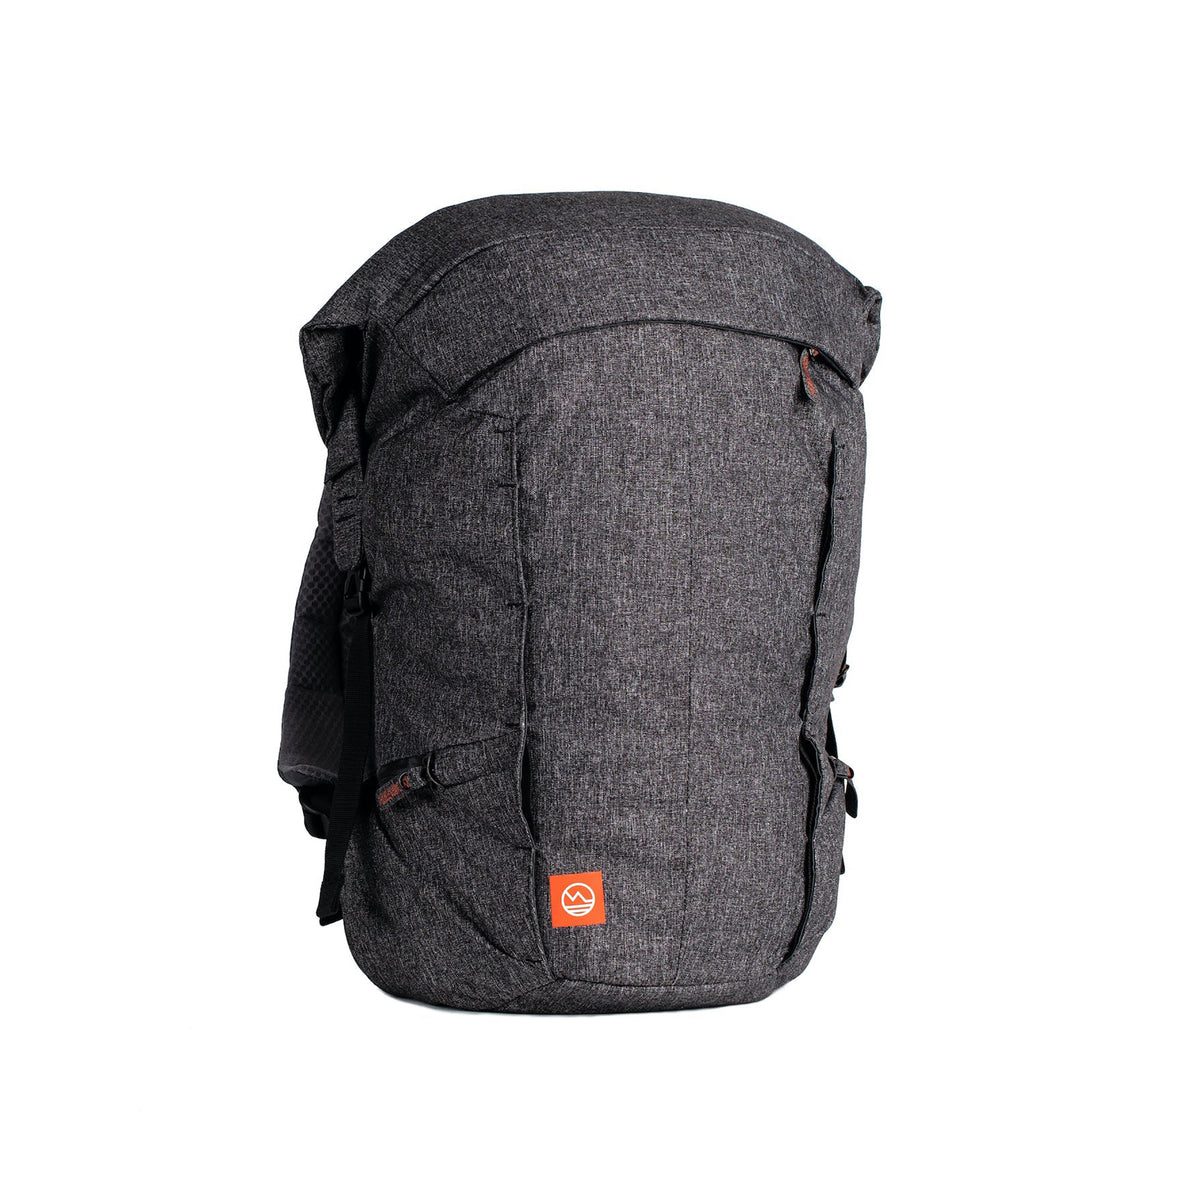 Hero image of Midnight Black Taqhuitz 2.0 Pack with Be Horizon Logo on the front bottom right panel.